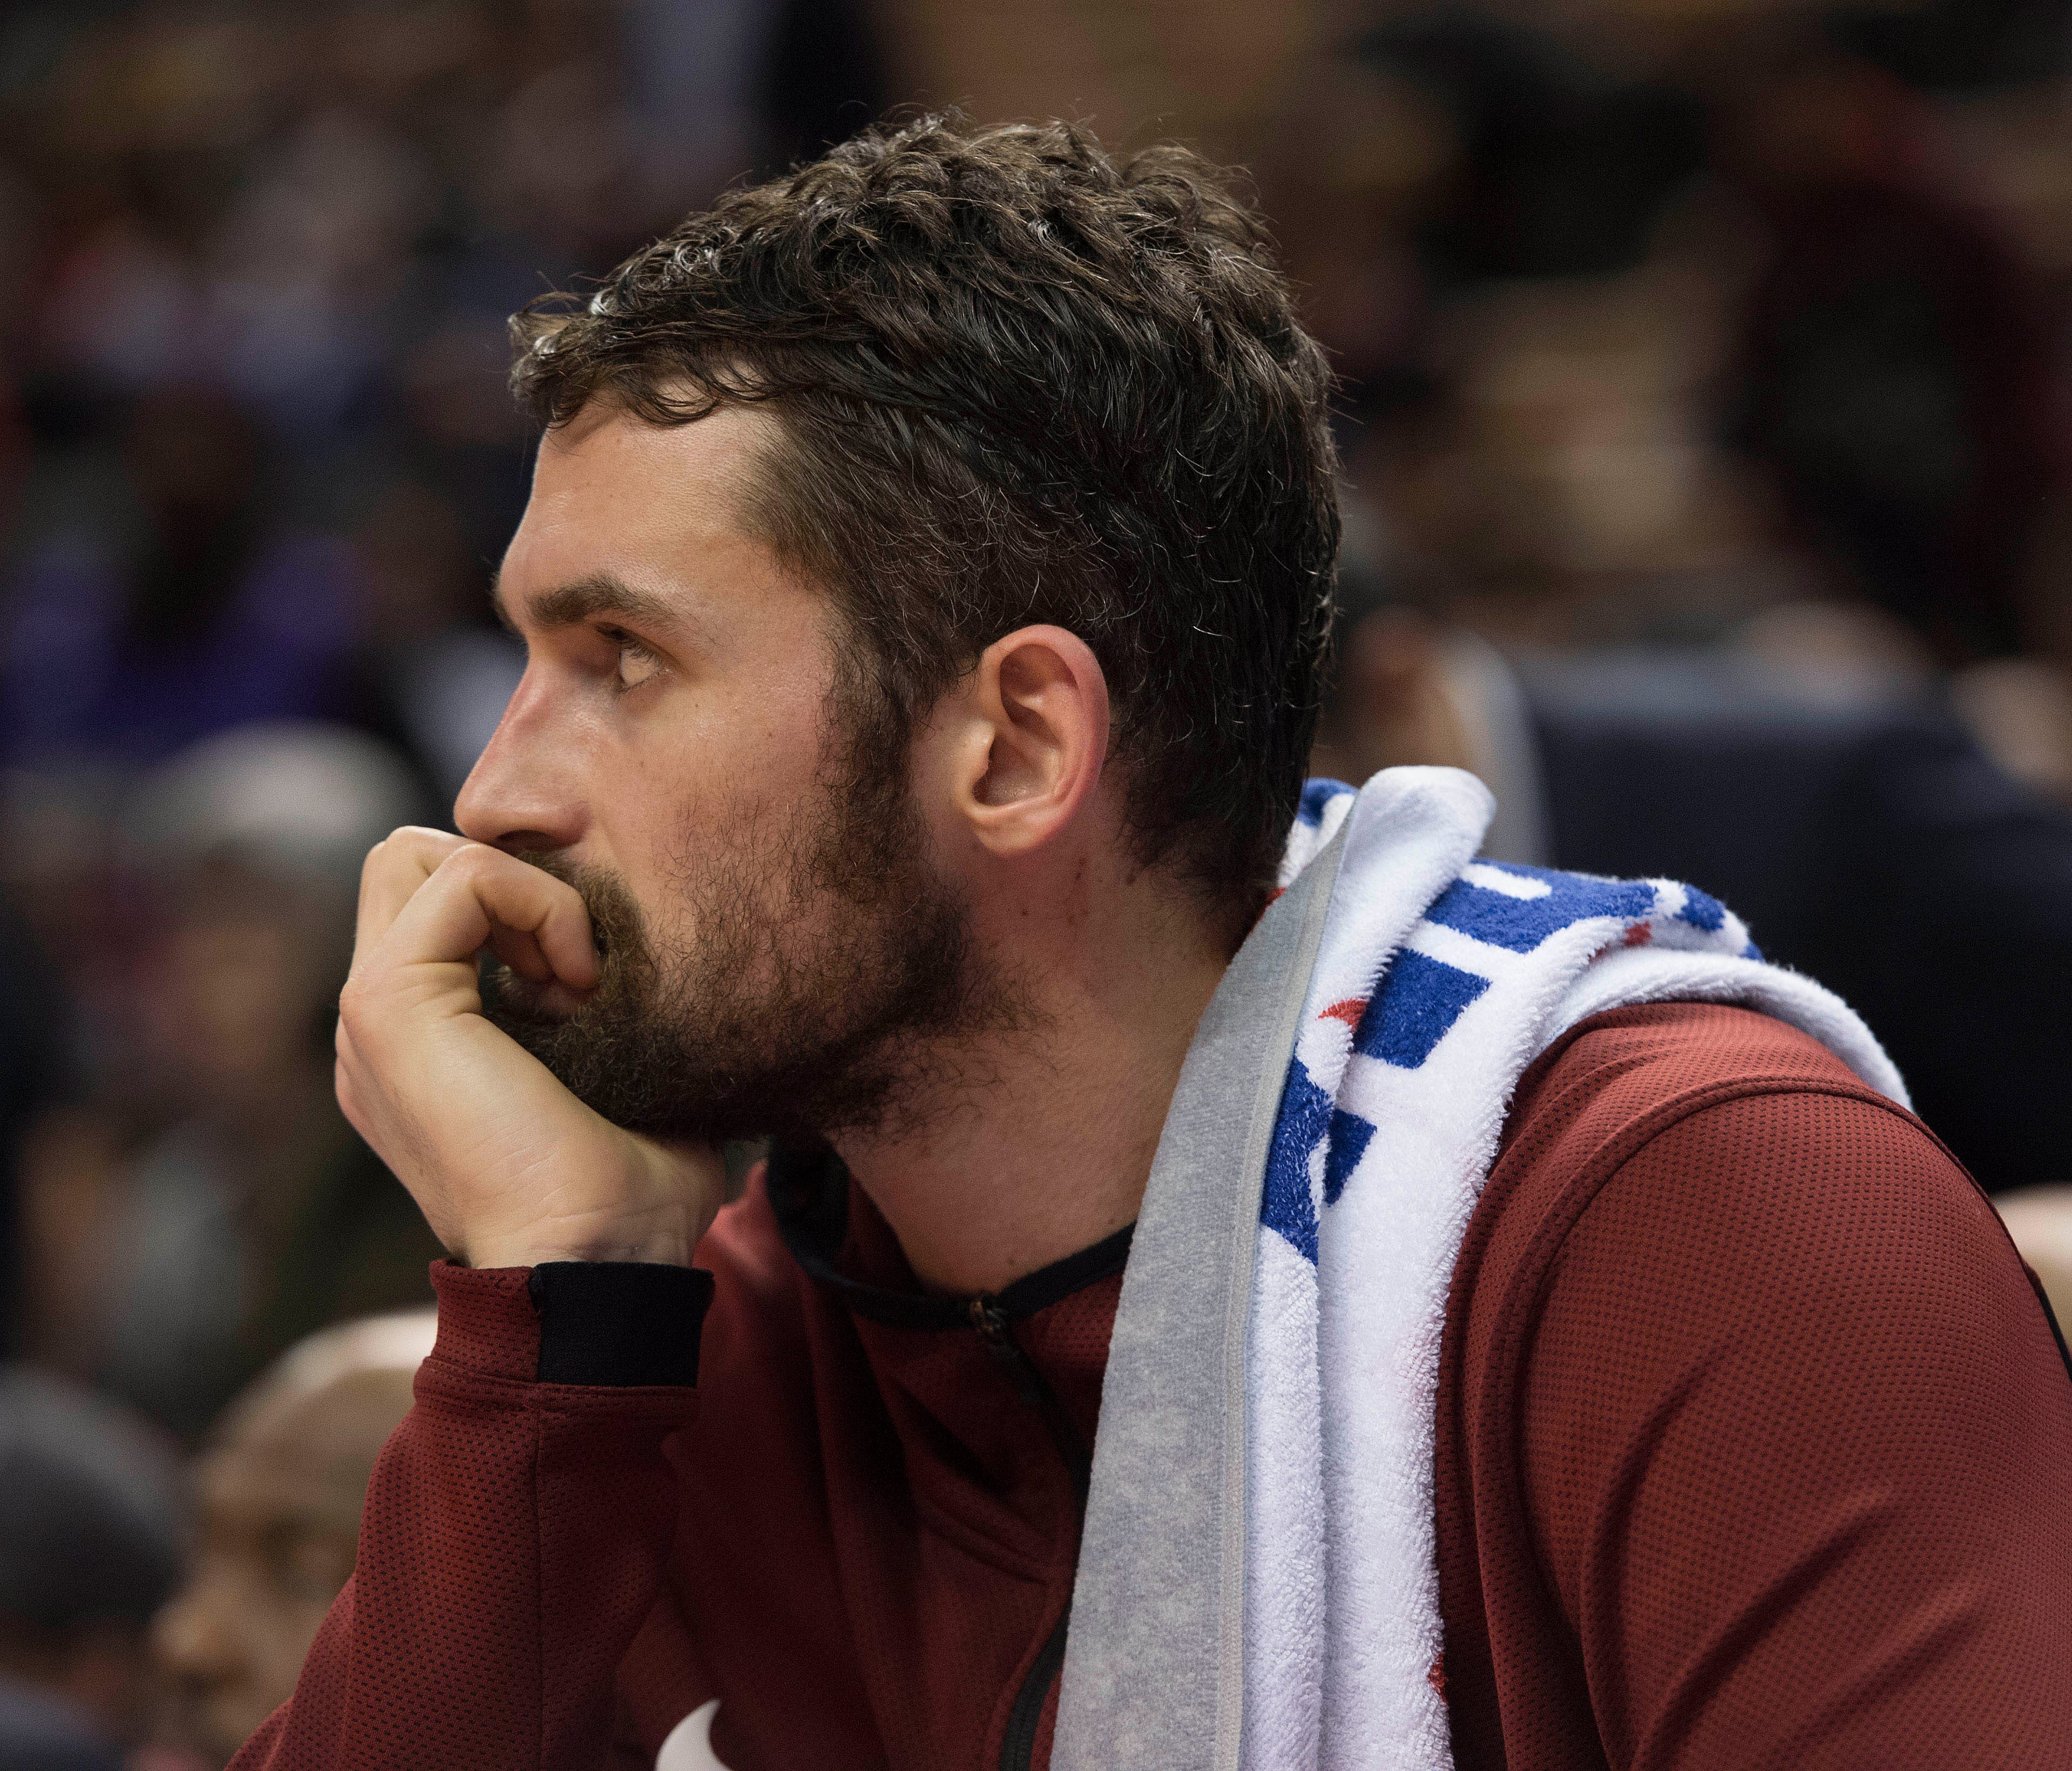 Cleveland Cavaliers forward Kevin Love (0) watches during the fourth quarter against the Toronto Raptors at Air Canada Centre.